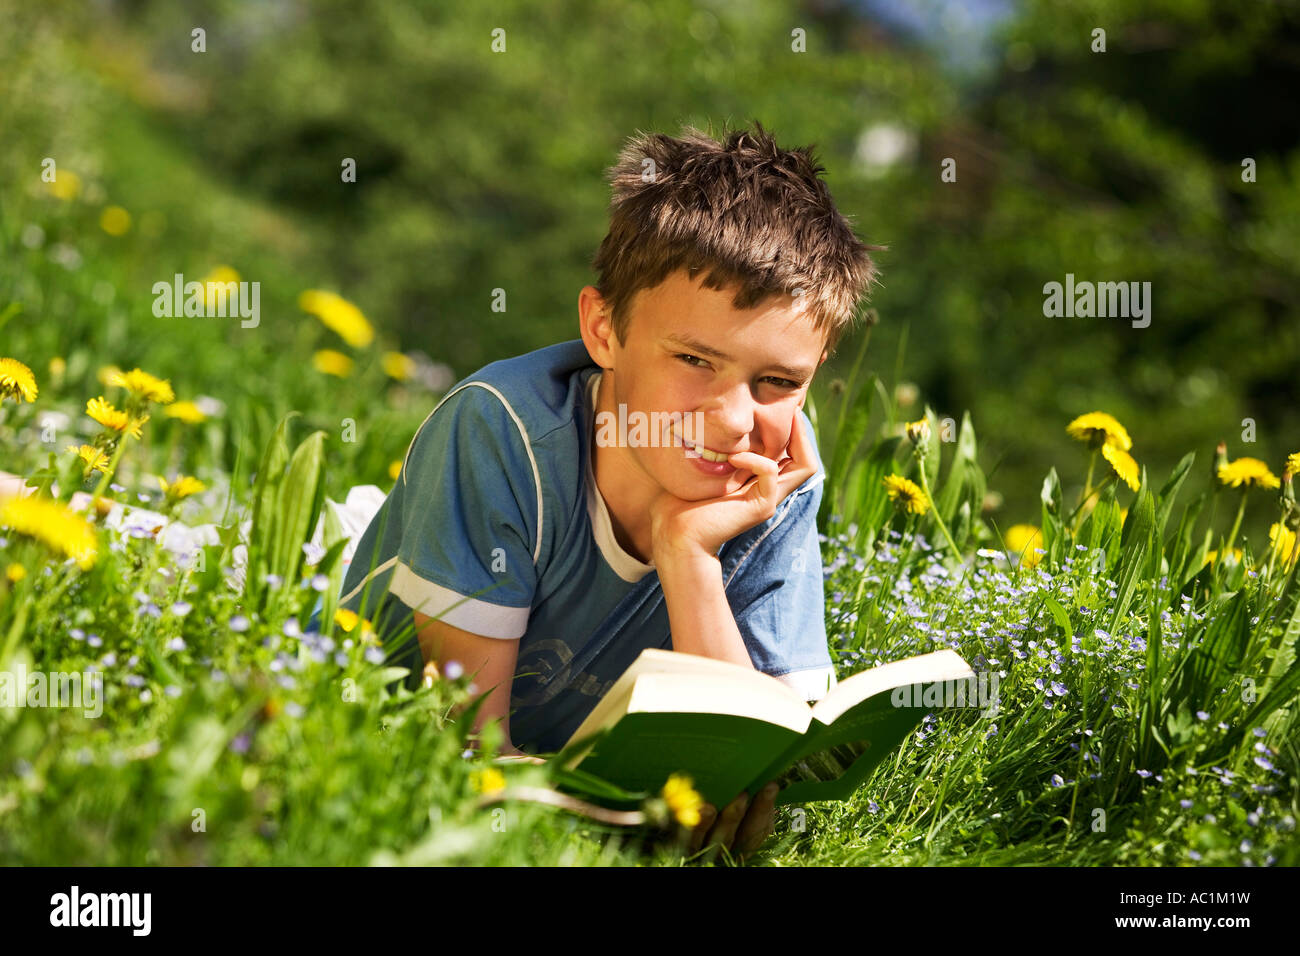 Boy in field reading book, resting head on hand Stock Photo